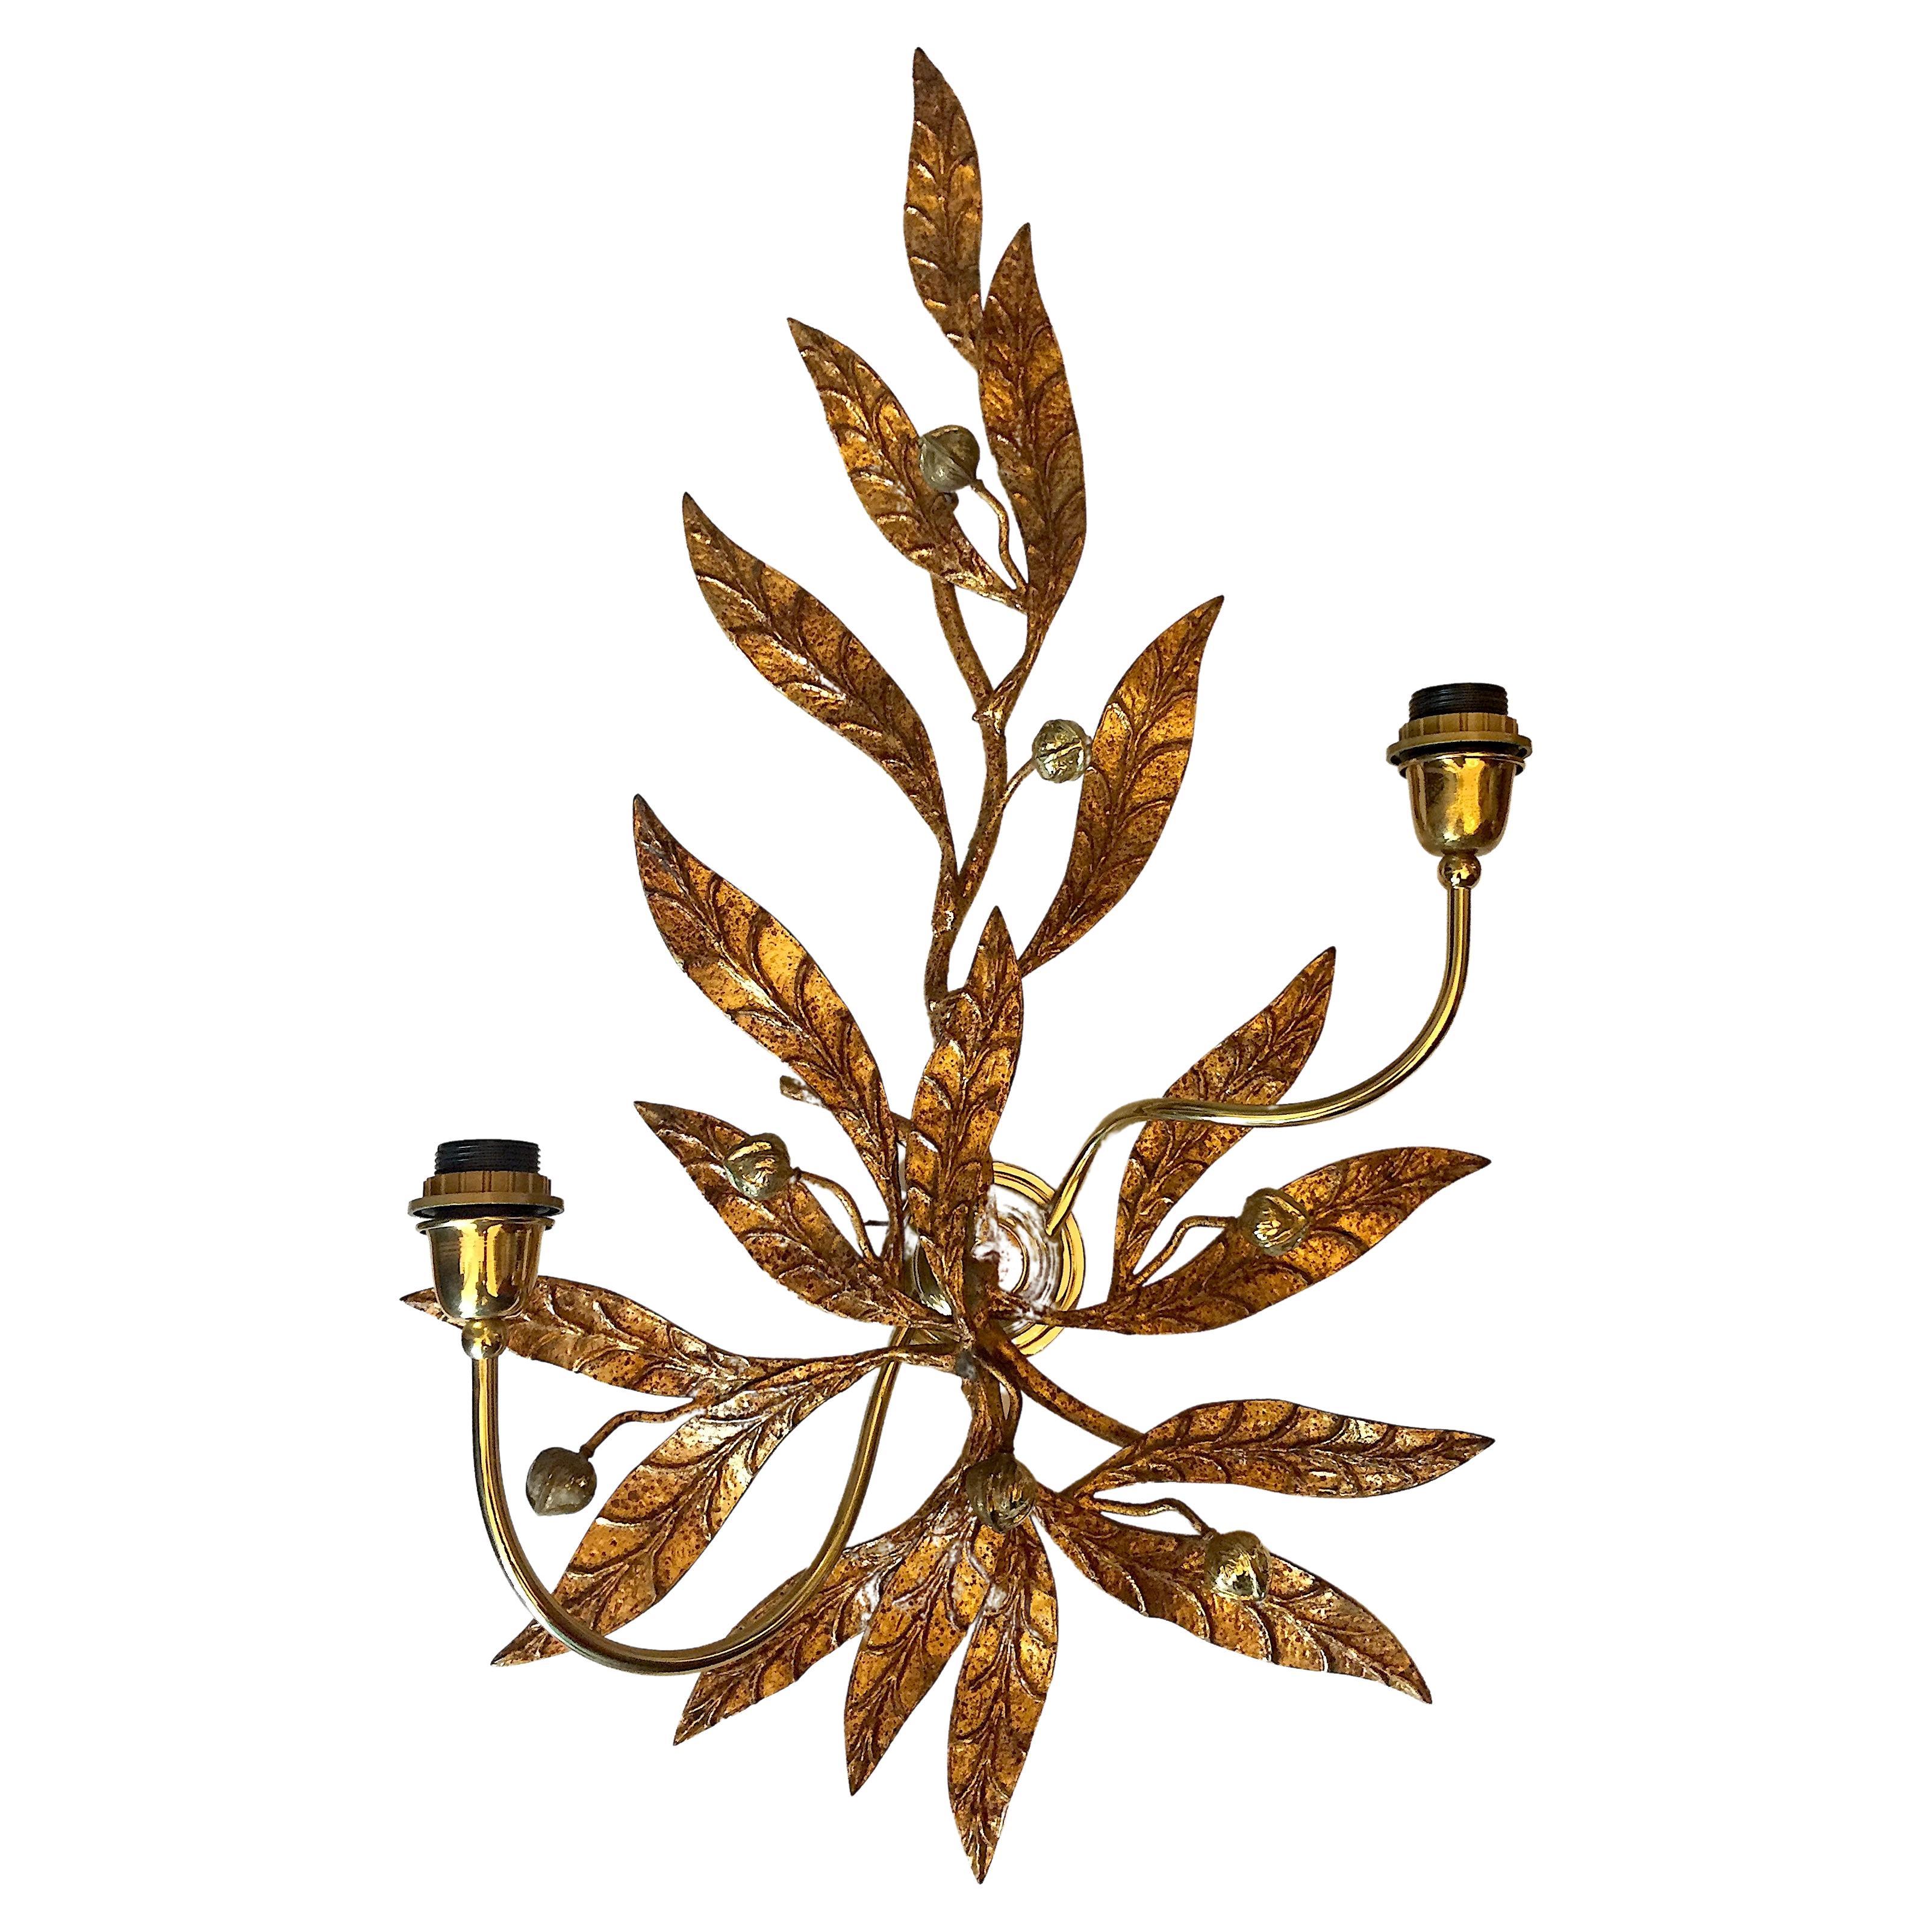 20th Century Italian Gilt Iron Leafed Sconce Monumental Two-light Wall Lamp